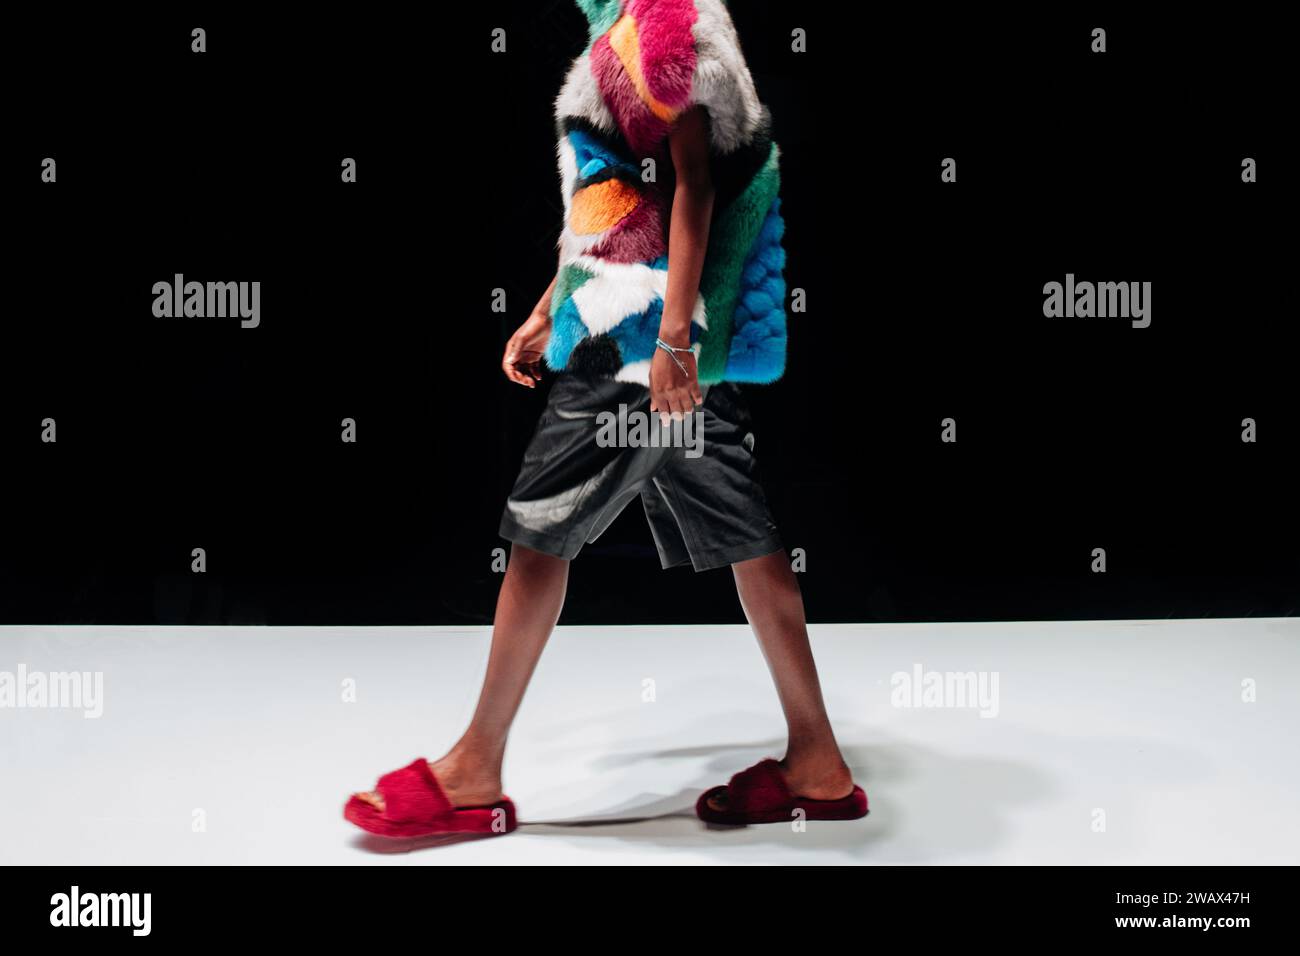 Part of a female figure dressed in a black shorts and fur coat walking on black background. Stock Photo